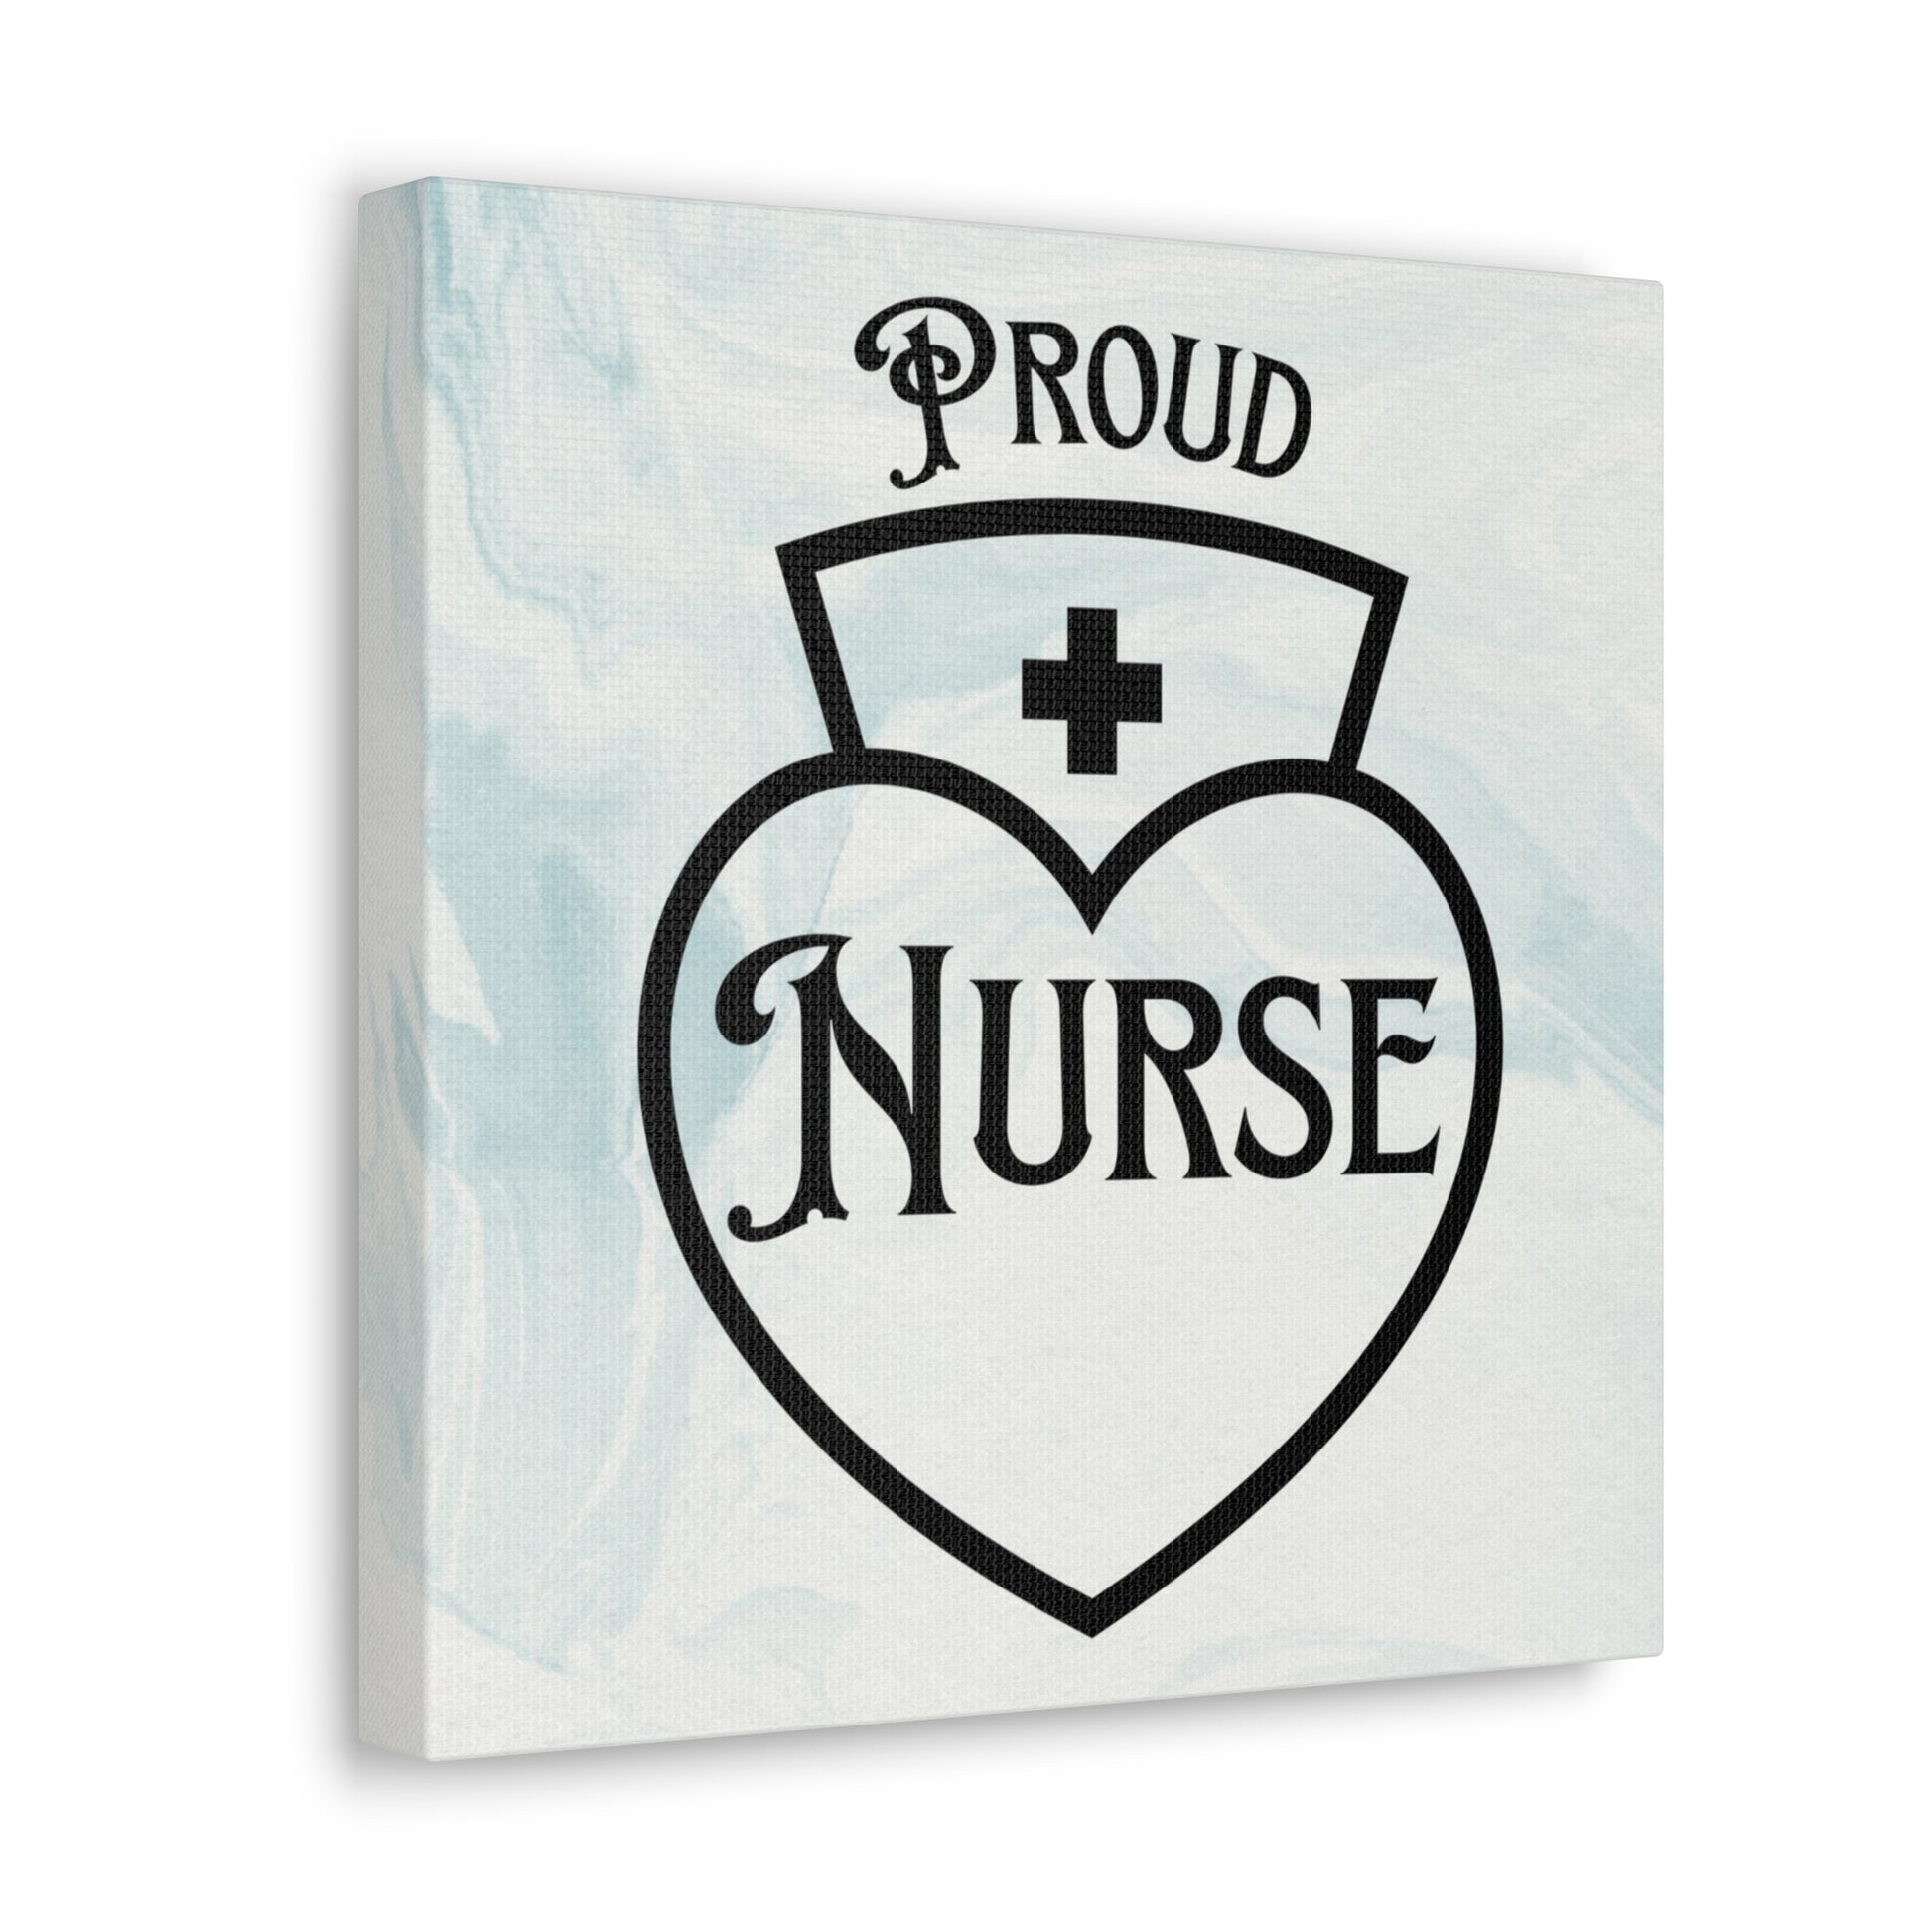 "Proud Nurse" Wall Art - Weave Got Gifts - Unique Gifts You Won’t Find Anywhere Else!